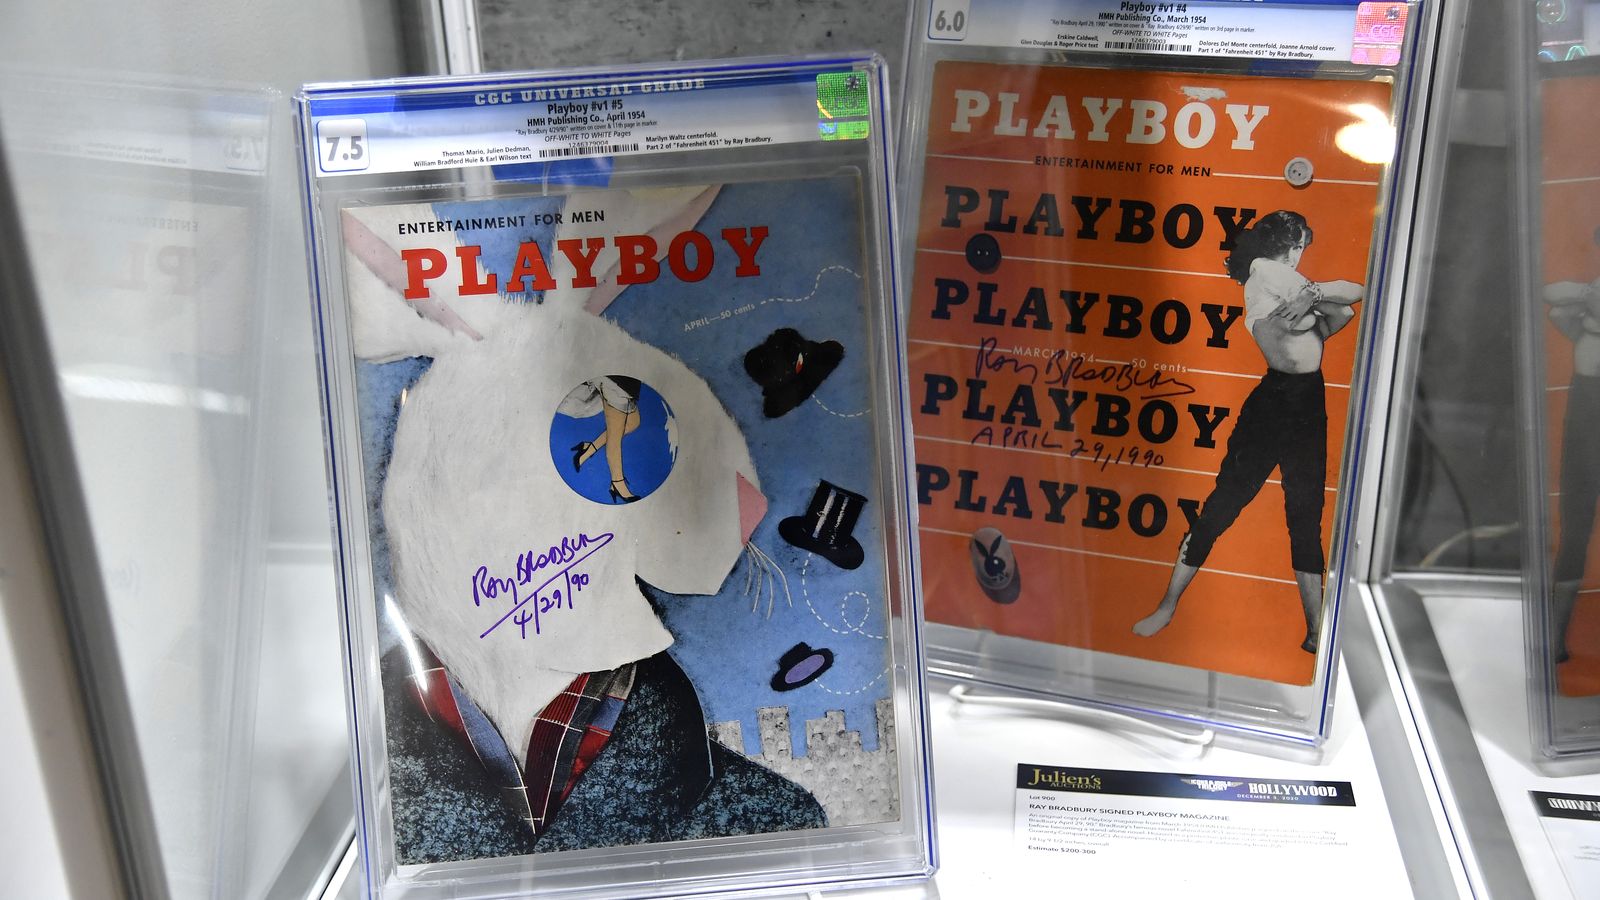 Playboy is carving a future by selling decades-old magazine covers 